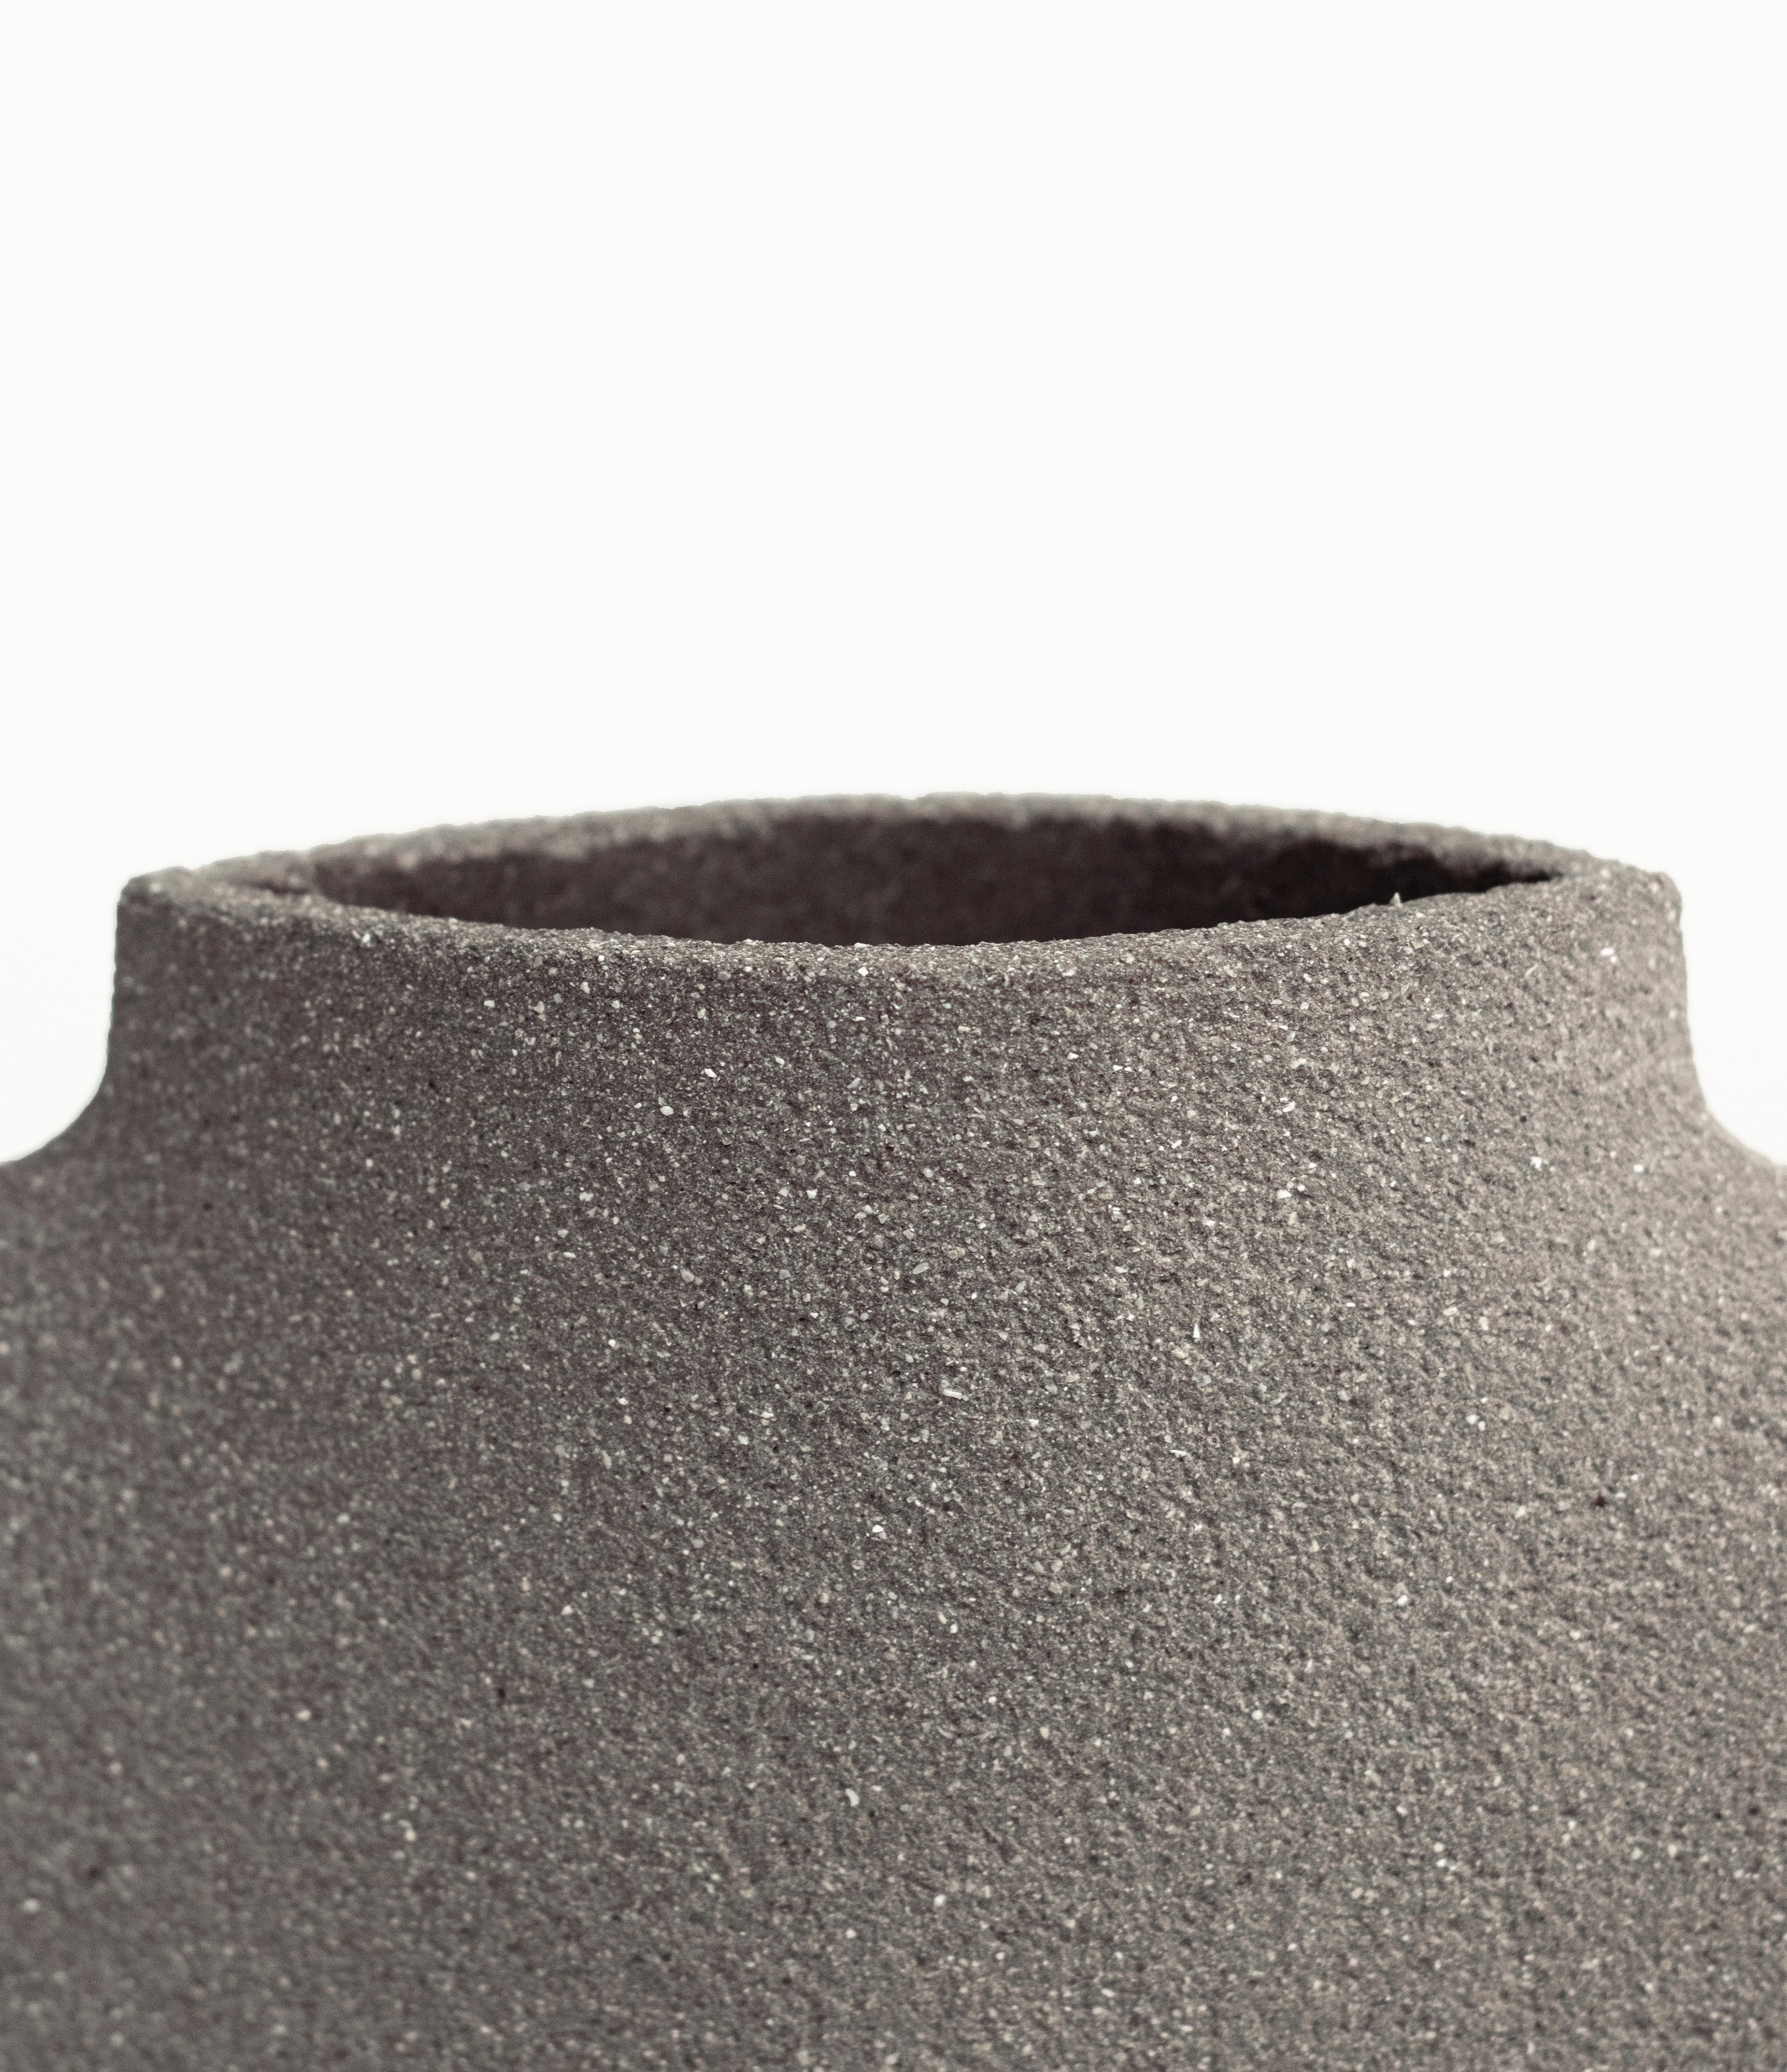 Minimalist 21st Century Ailes N°2 Vase in Grey Ceramic, Hand-Crafted in France